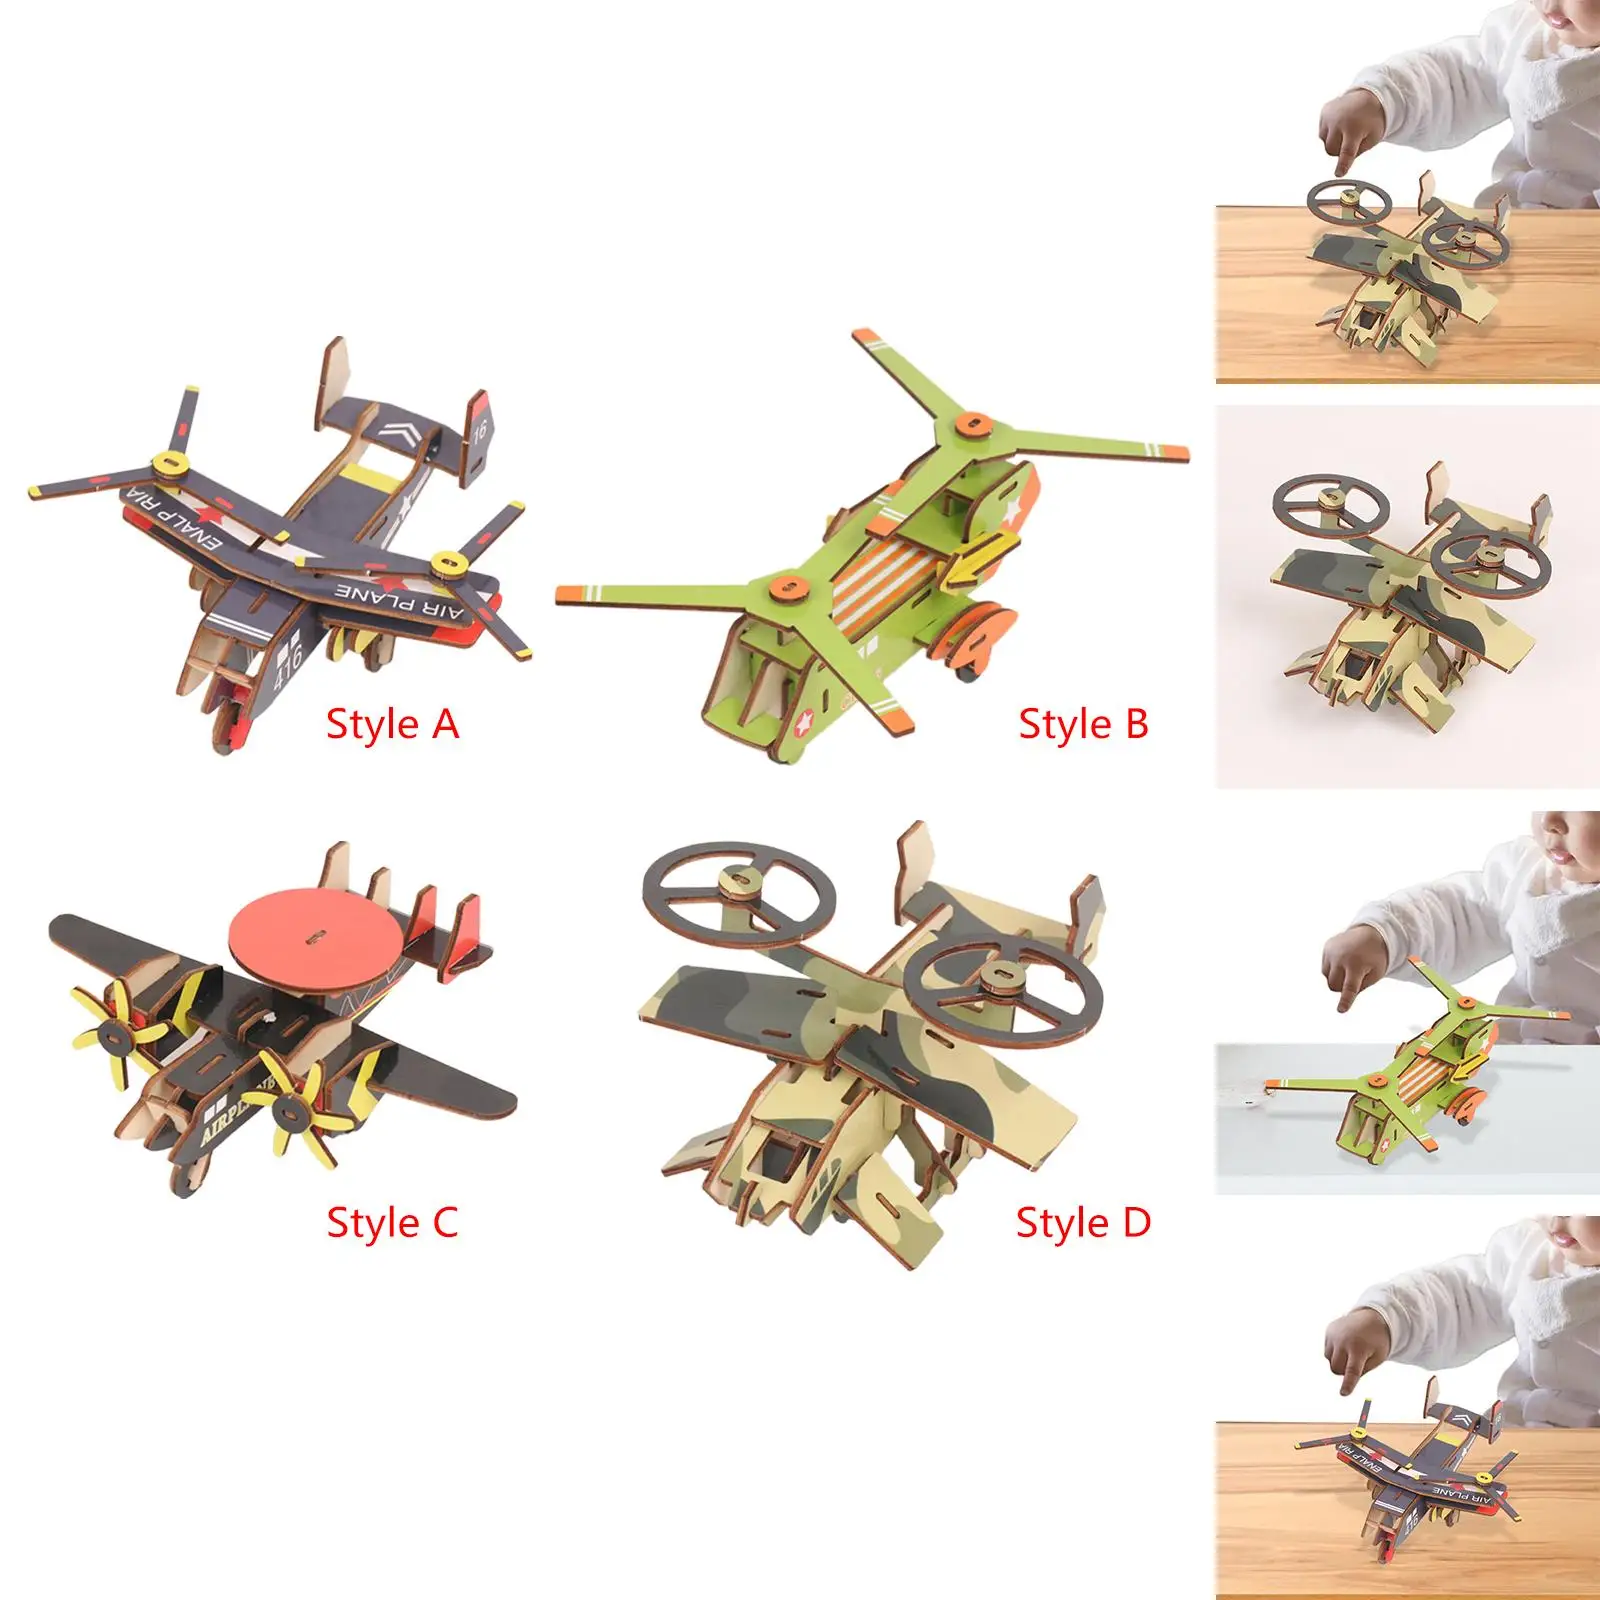 

DIY 3D Wooden Puzzle Assembly Planes to Build DIY Crafts Projects Jigsaw Puzzles Airplane Model Kit for Adults Kids Boys Girls